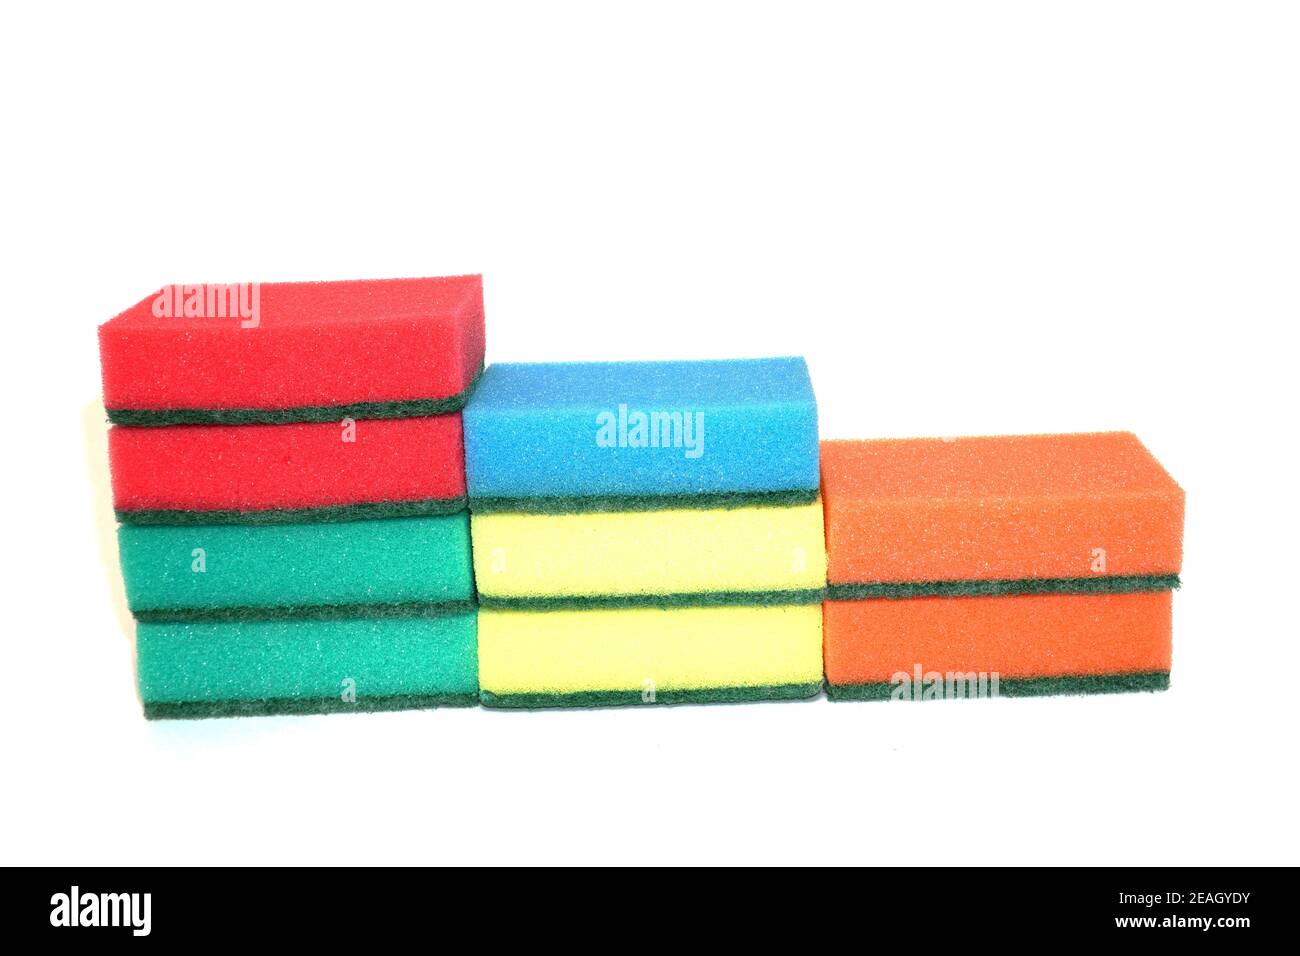 https://c8.alamy.com/comp/2EAGYDY/multicolored-lgbt-sponges-stairs-for-washing-dishes-isolated-on-white-background-2EAGYDY.jpg